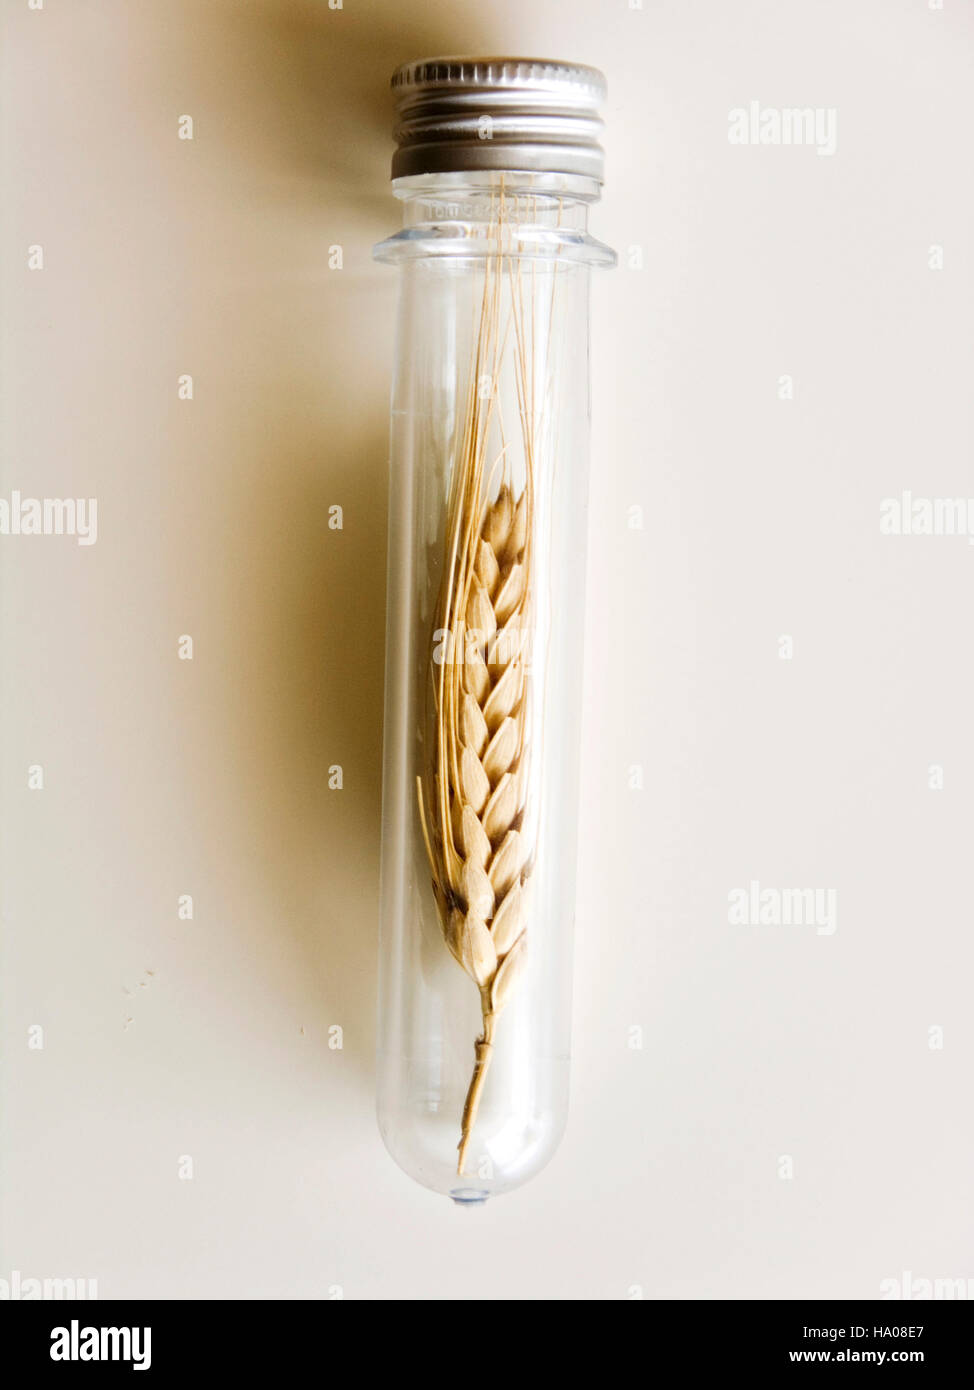 Food crisis preservation concept Stock Photo